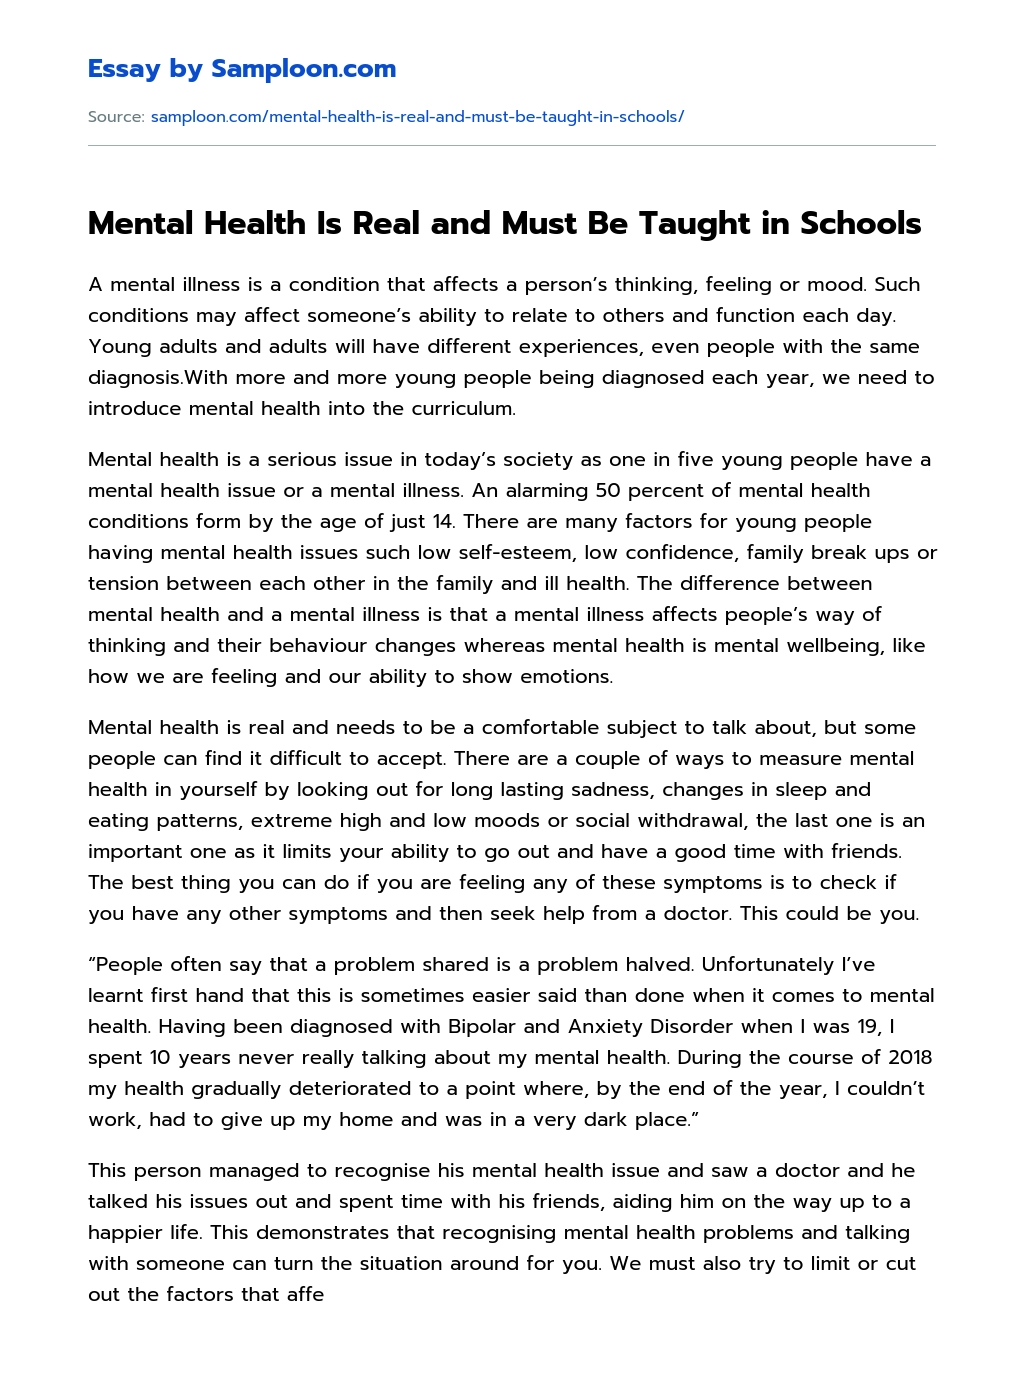 Mental Health Is Real and Must Be Taught in Schools essay